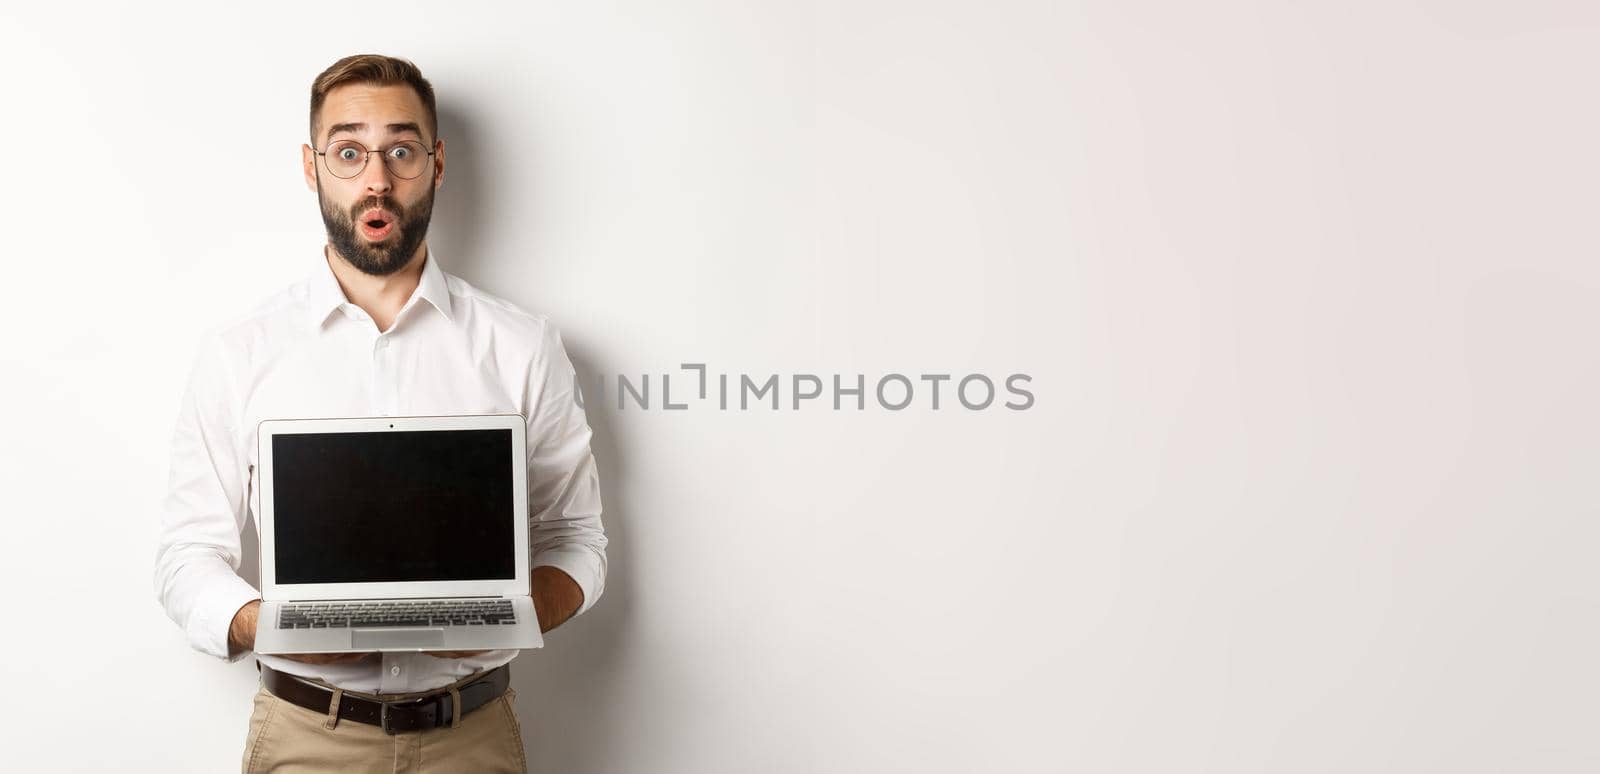 Excited businessman showing something on laptop screen, standing happy over white background.